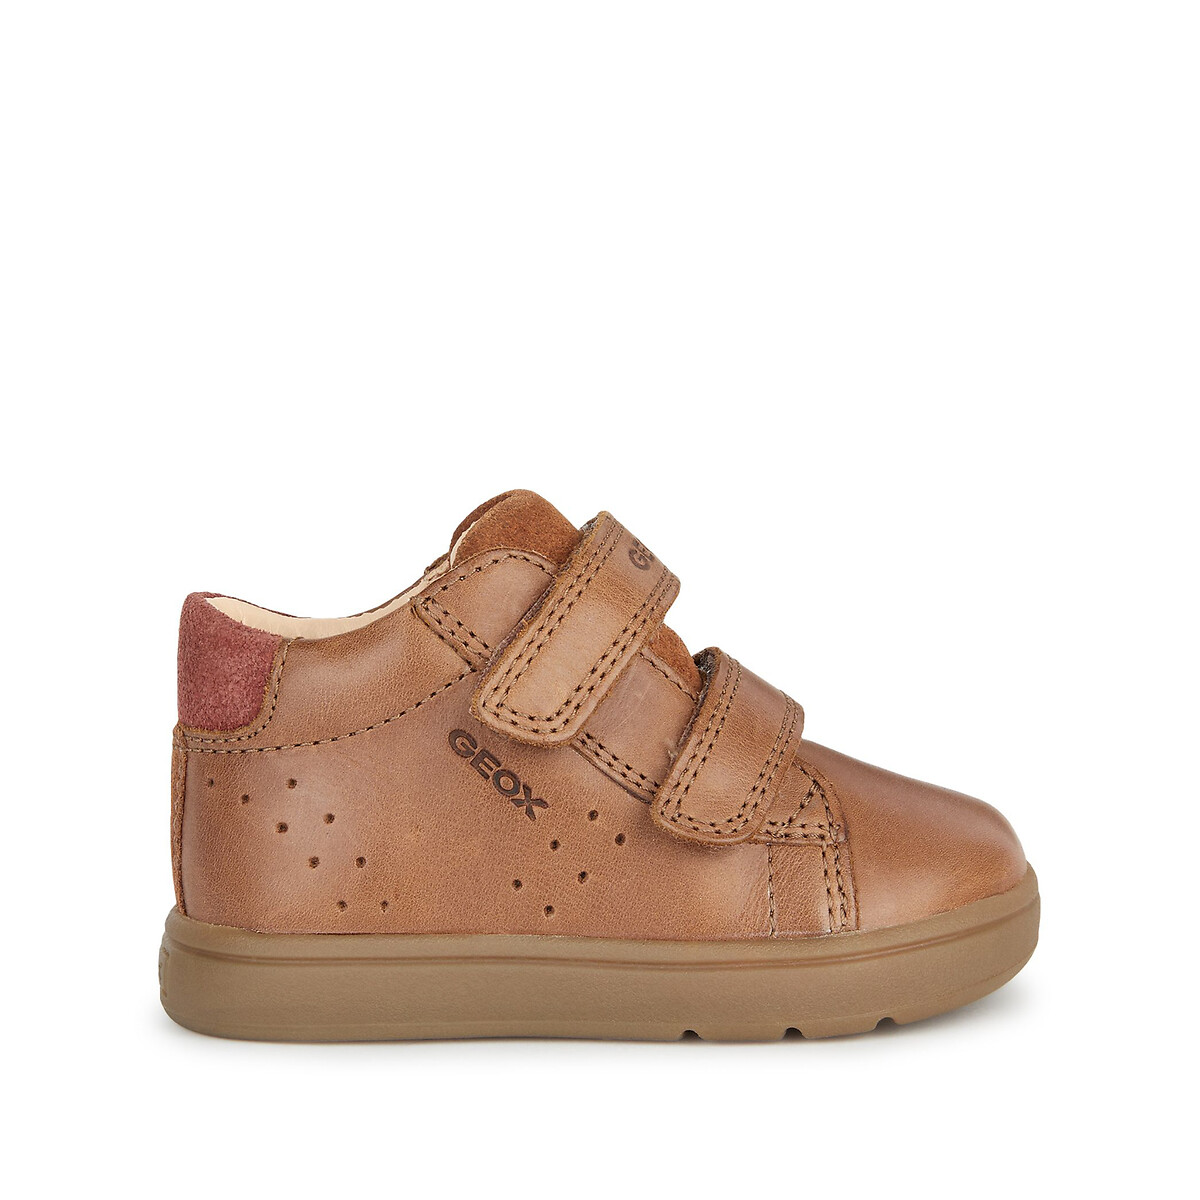 Kids Biglia Trainers in Leather/Suede with Touch ’n’ Close Fastening